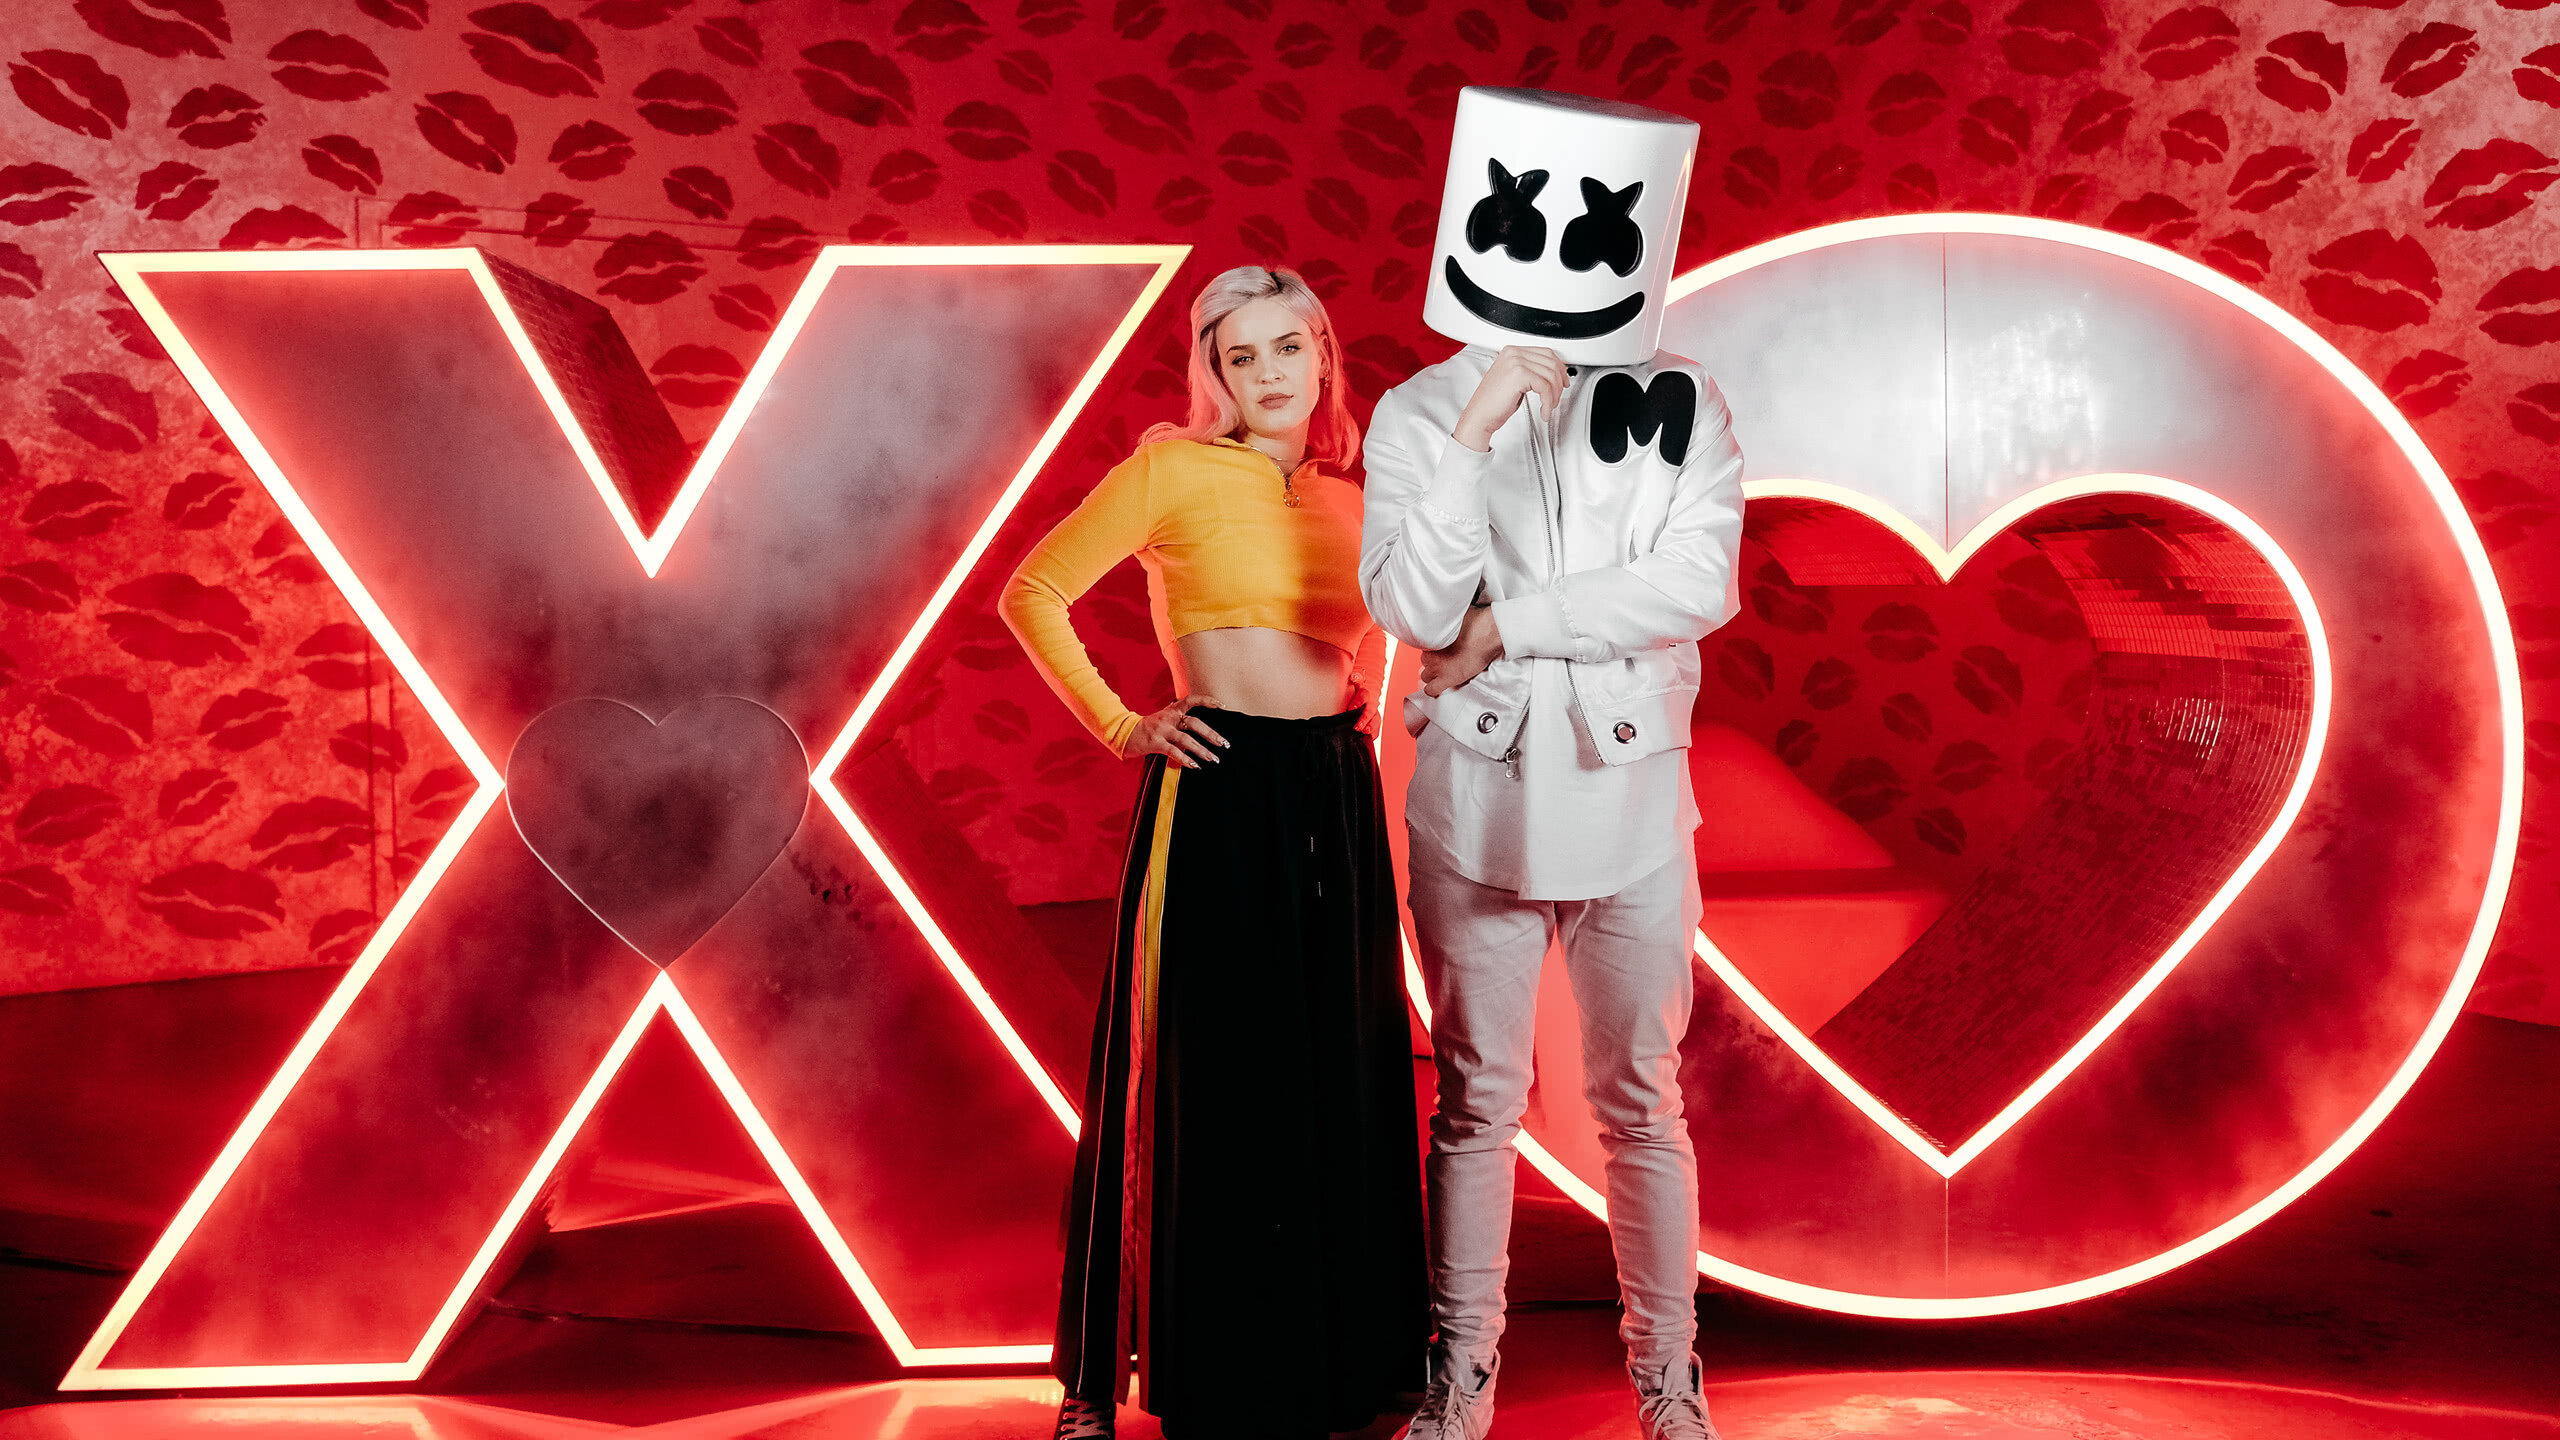 Anne-Marie: "Friends" featuring Marshmello was released on February 9, 2018. 2560x1440 HD Wallpaper.